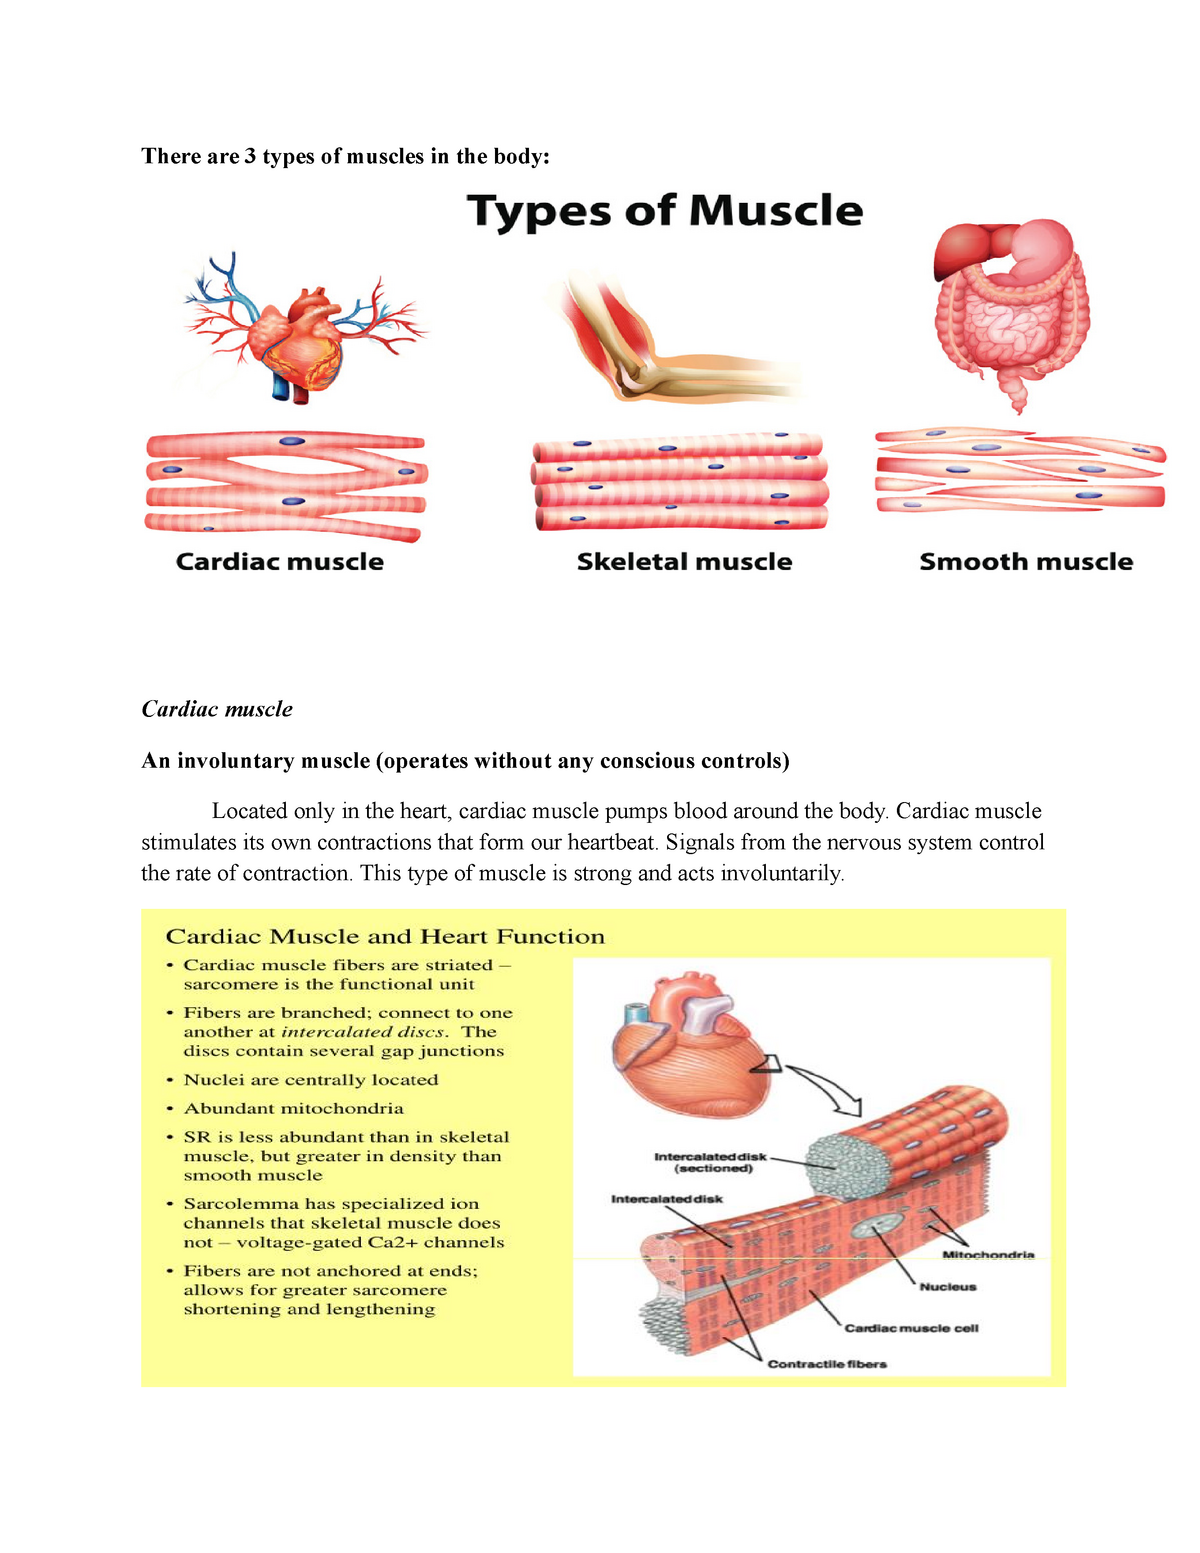 There are 3 types of muscles in the body - Cardiac muscle stimulates ...